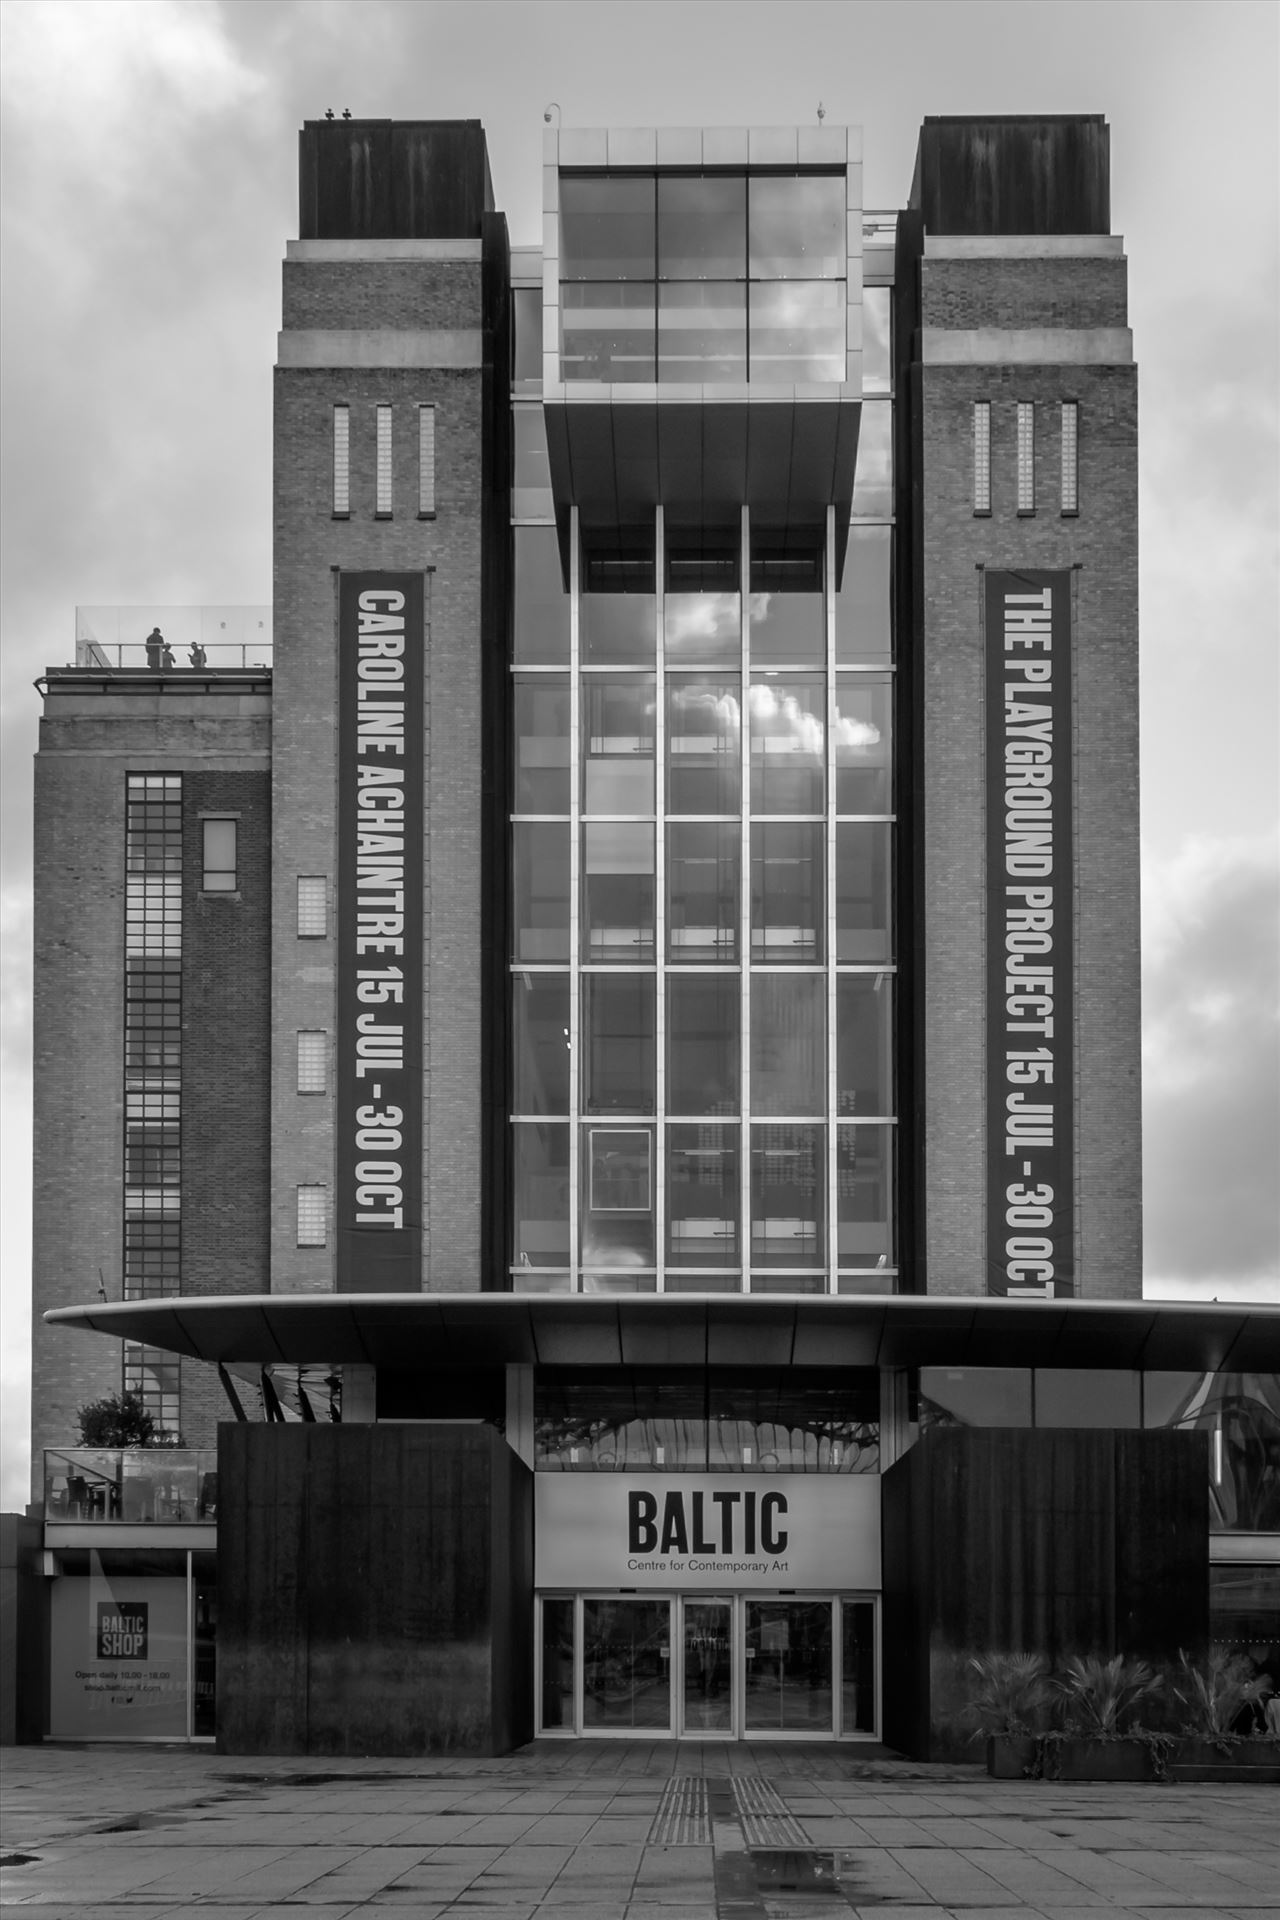 Baltic Centre for Contemporary Art, Gateshead - Housed in the Landmark, J R Rank Flour Mill building, its a major International centre for contemporary art. 2,600 square metres of art space, and boasts a rooftop restaurant with magnificent view of the River Tyne and Quayside. by Graham Dobson Photography